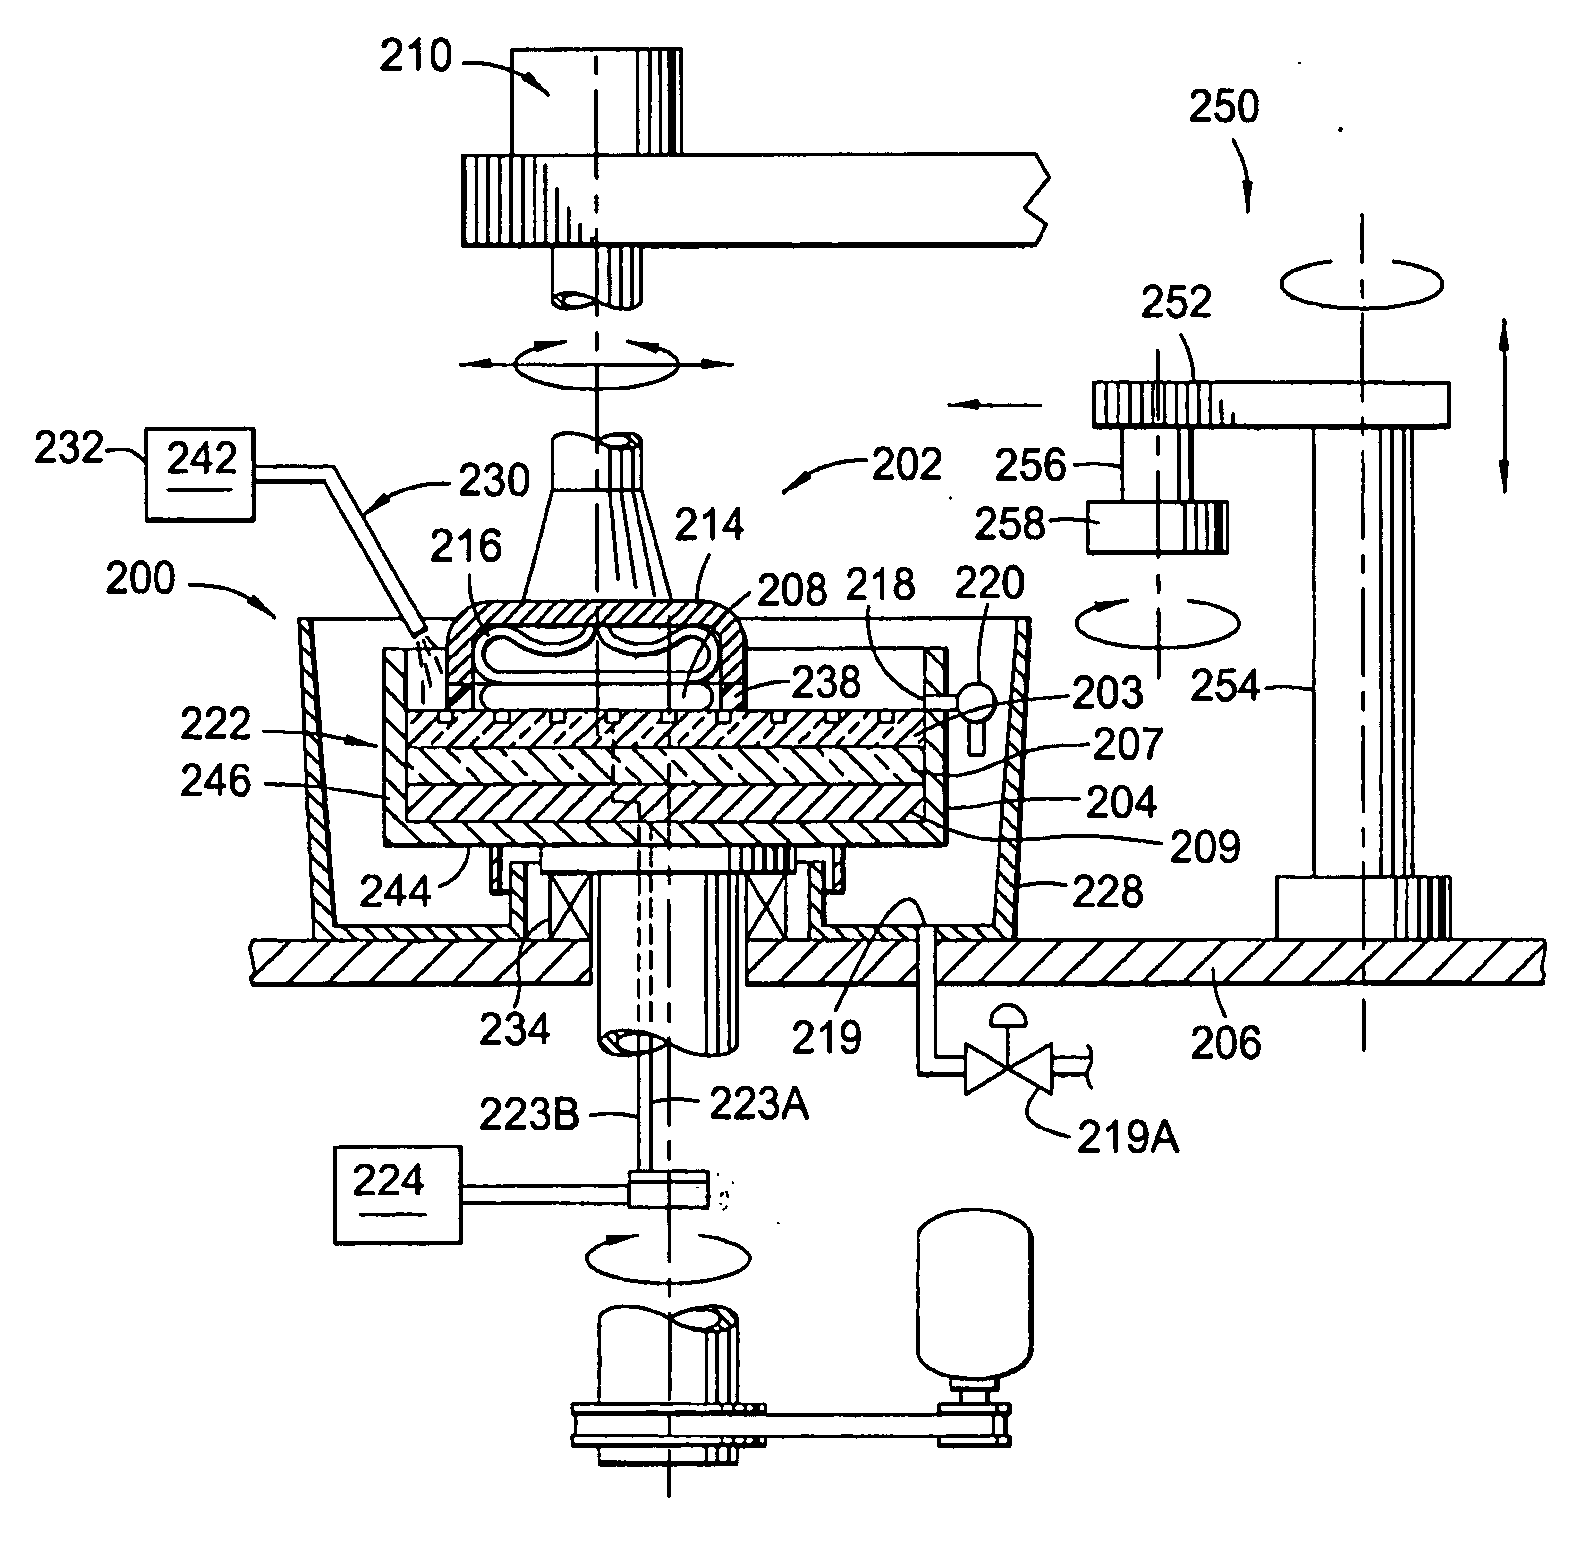 Method for conditioning a polishing pad